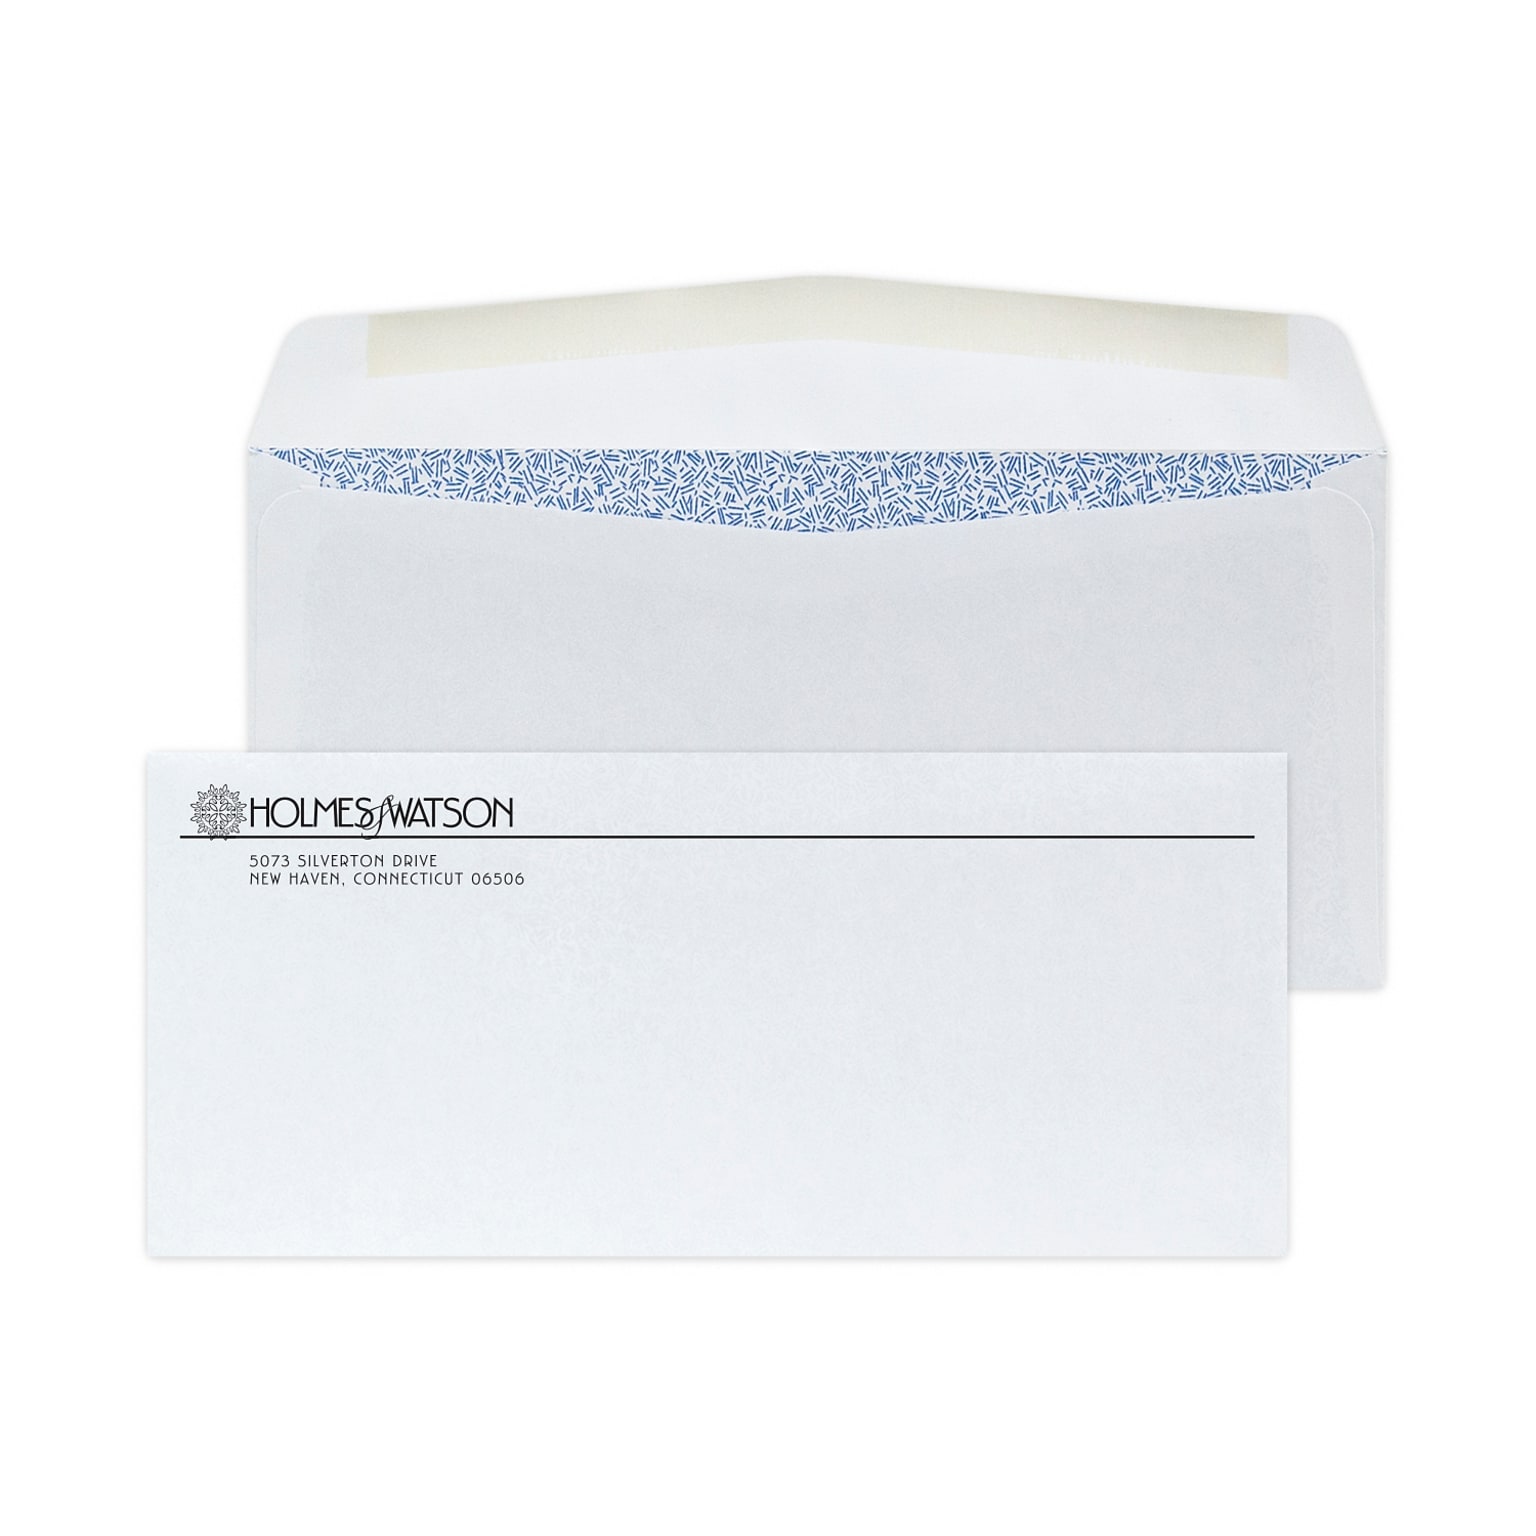 Custom #9 Standard Envelopes with Security Tint, 3 7/8 x 8 7/8, 24# White Wove, 1 Standard Ink, 250 / Pack